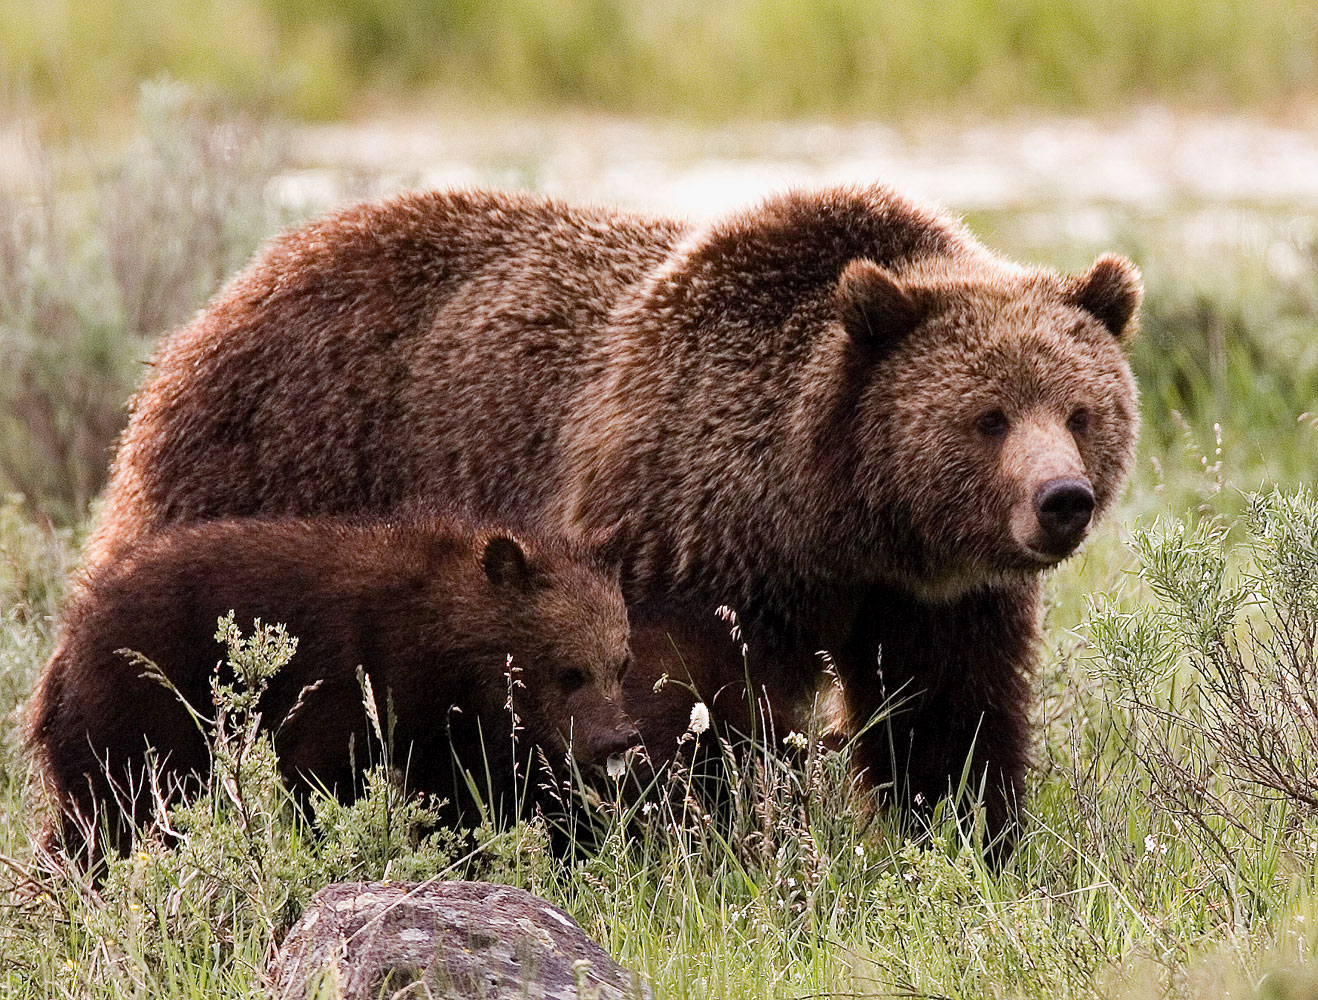 This young grizzly cub was happy to walk along side mom as she continues their tireless search for food.